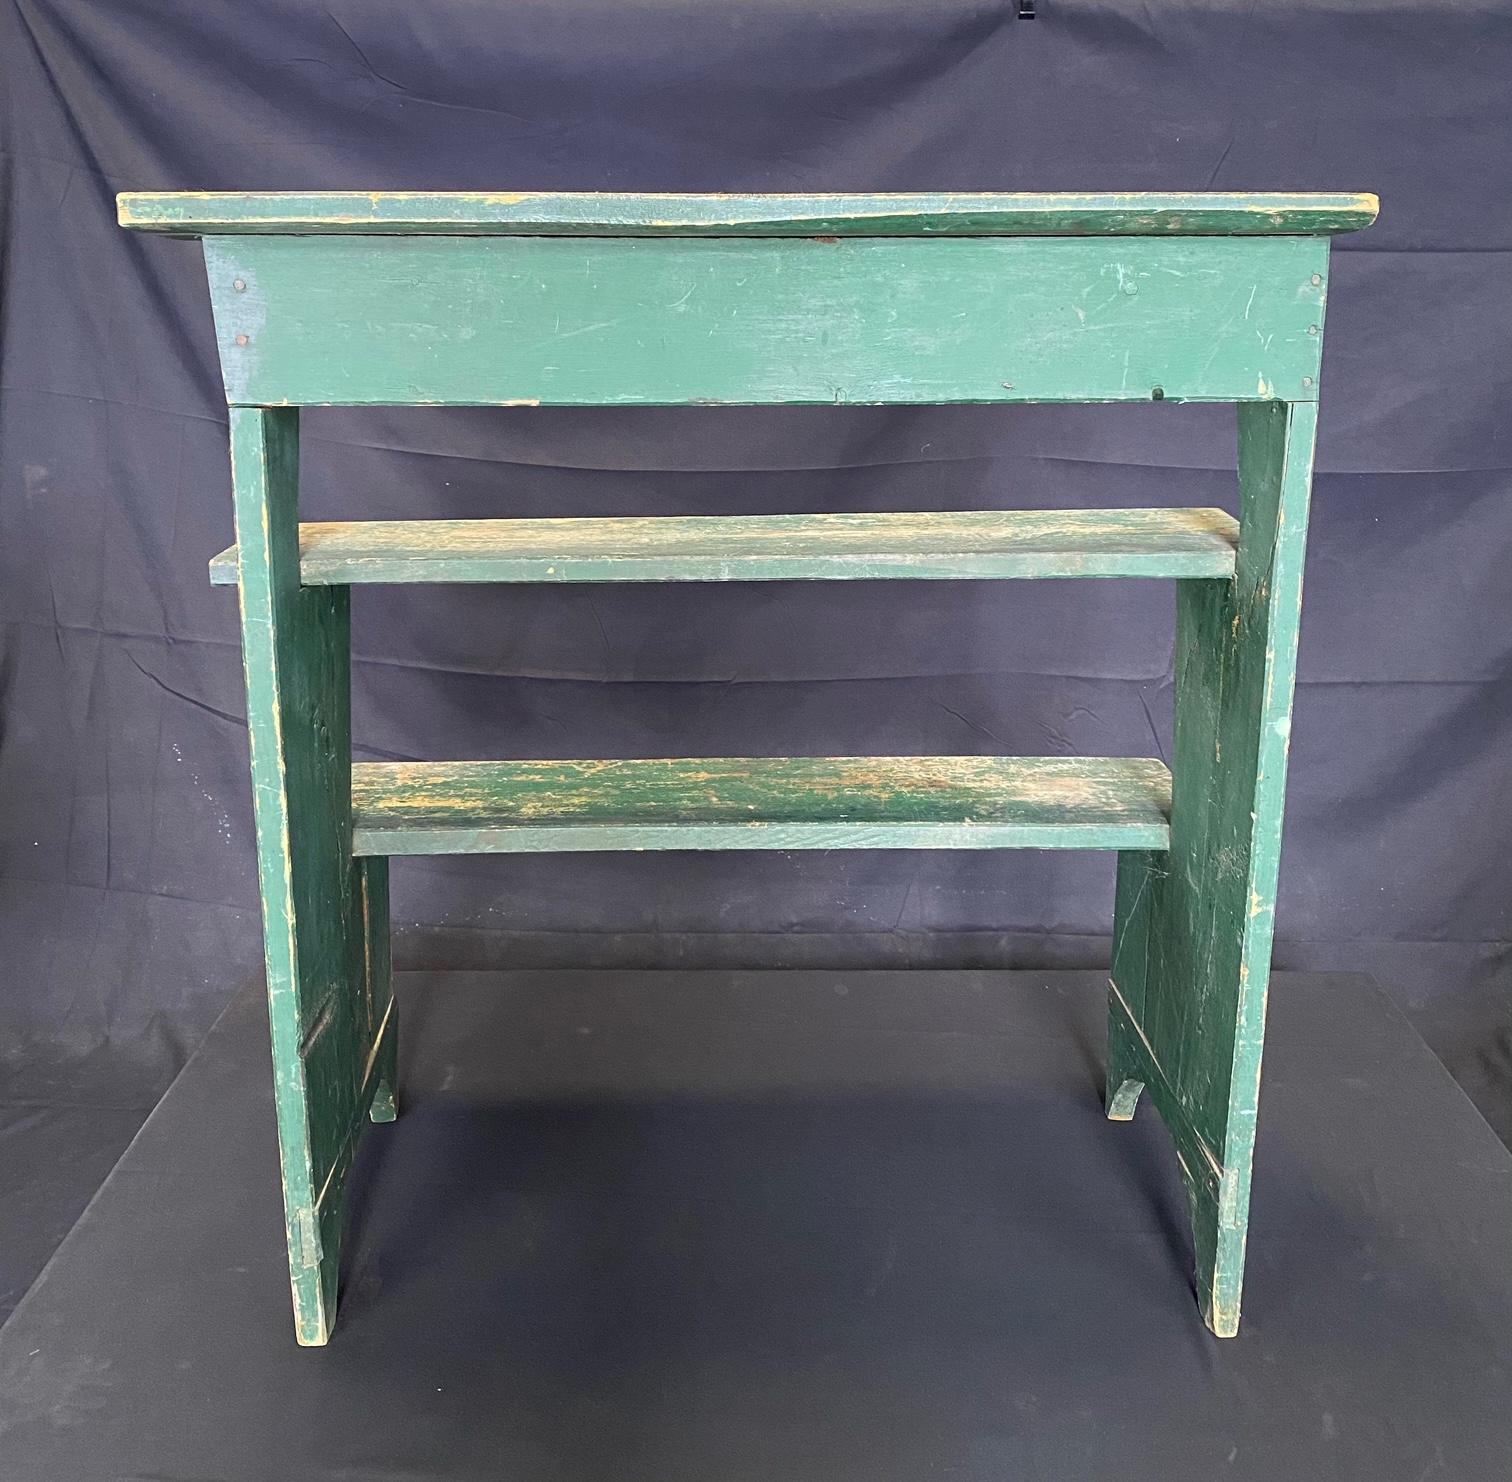 Beautiful classic 19th century waterfall steps which can serve as a plant stand or pot shelves. Lovely, original green early milk paint and rosehead nails. Waterfall garden, green house or patio plant pot shelves or decorative stand. Can be used